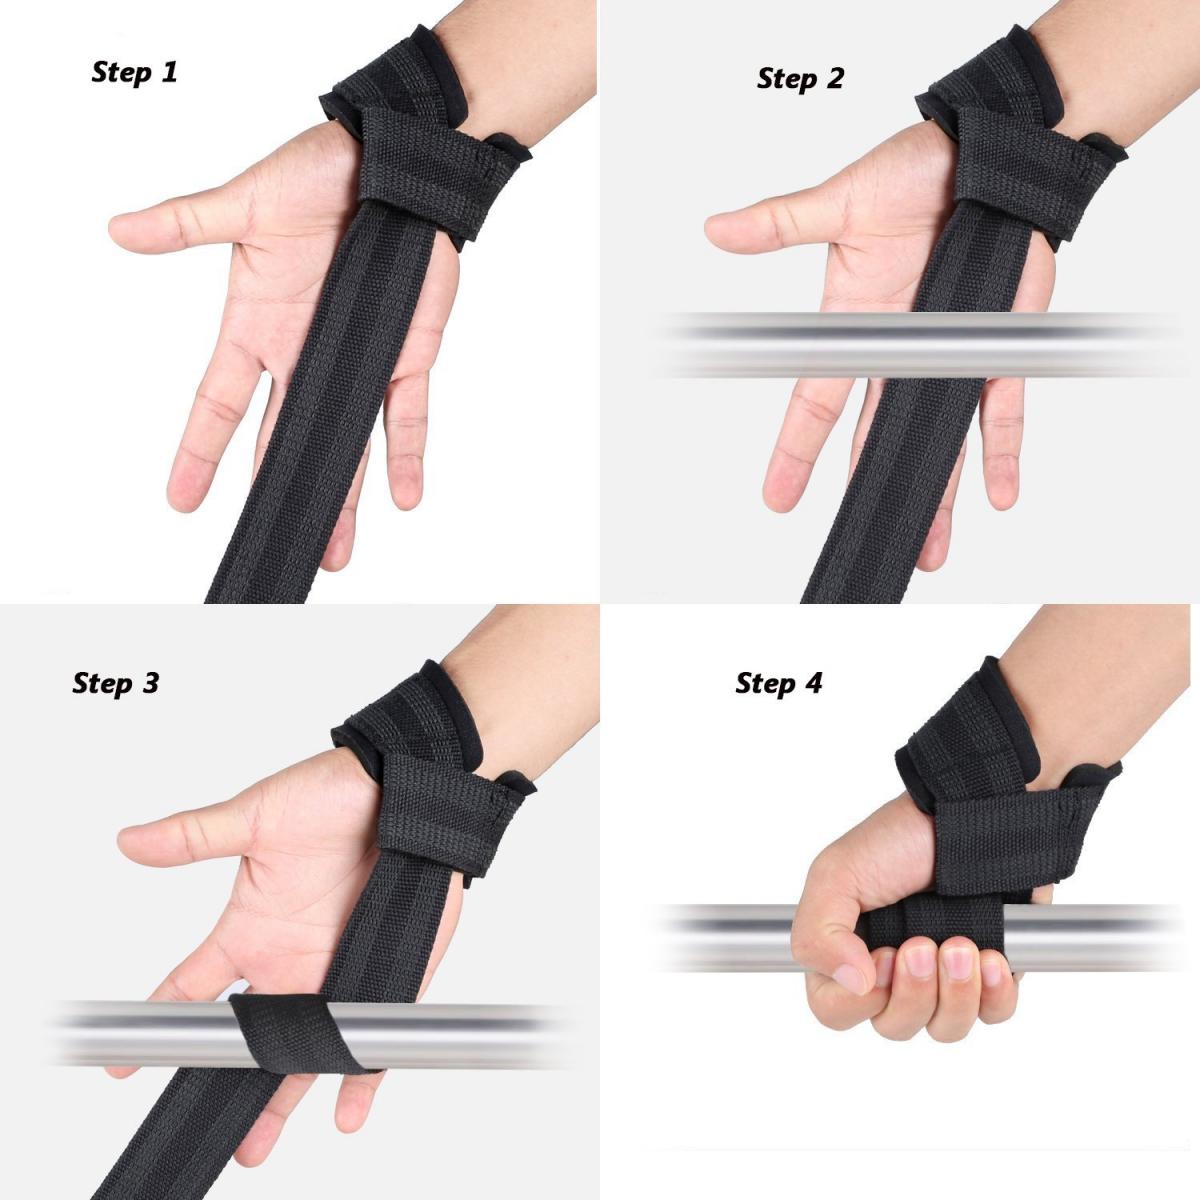 What Are Wrist Straps, How to Put Them On & Use Them Correctly